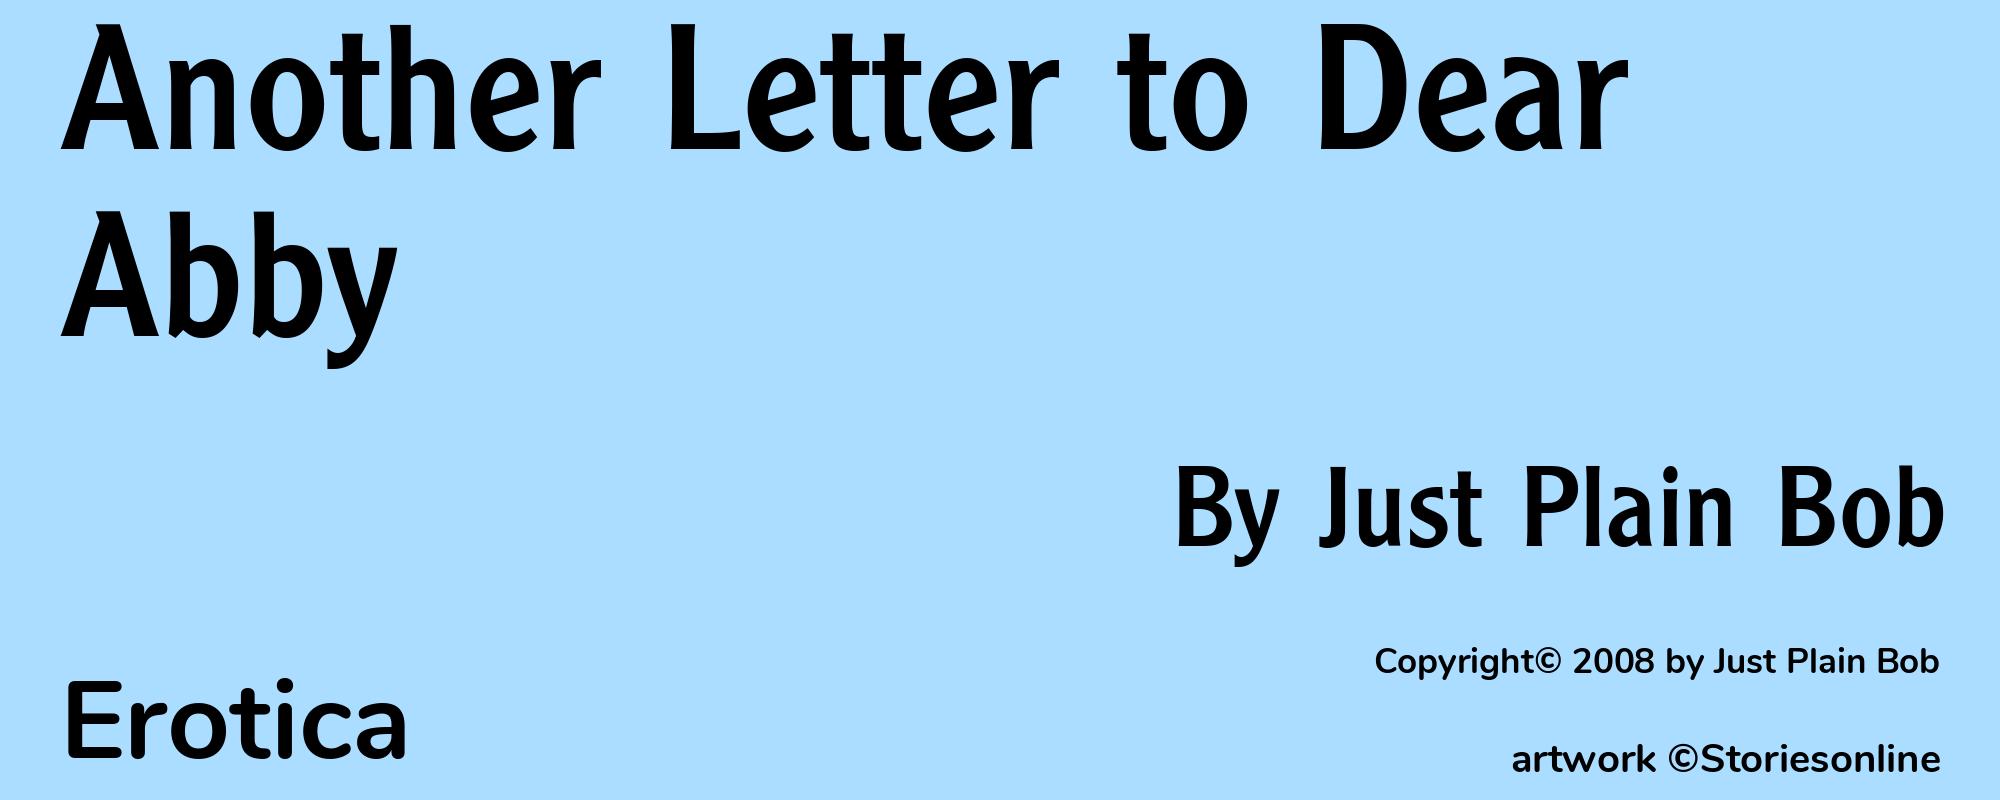 Another Letter to Dear Abby - Cover